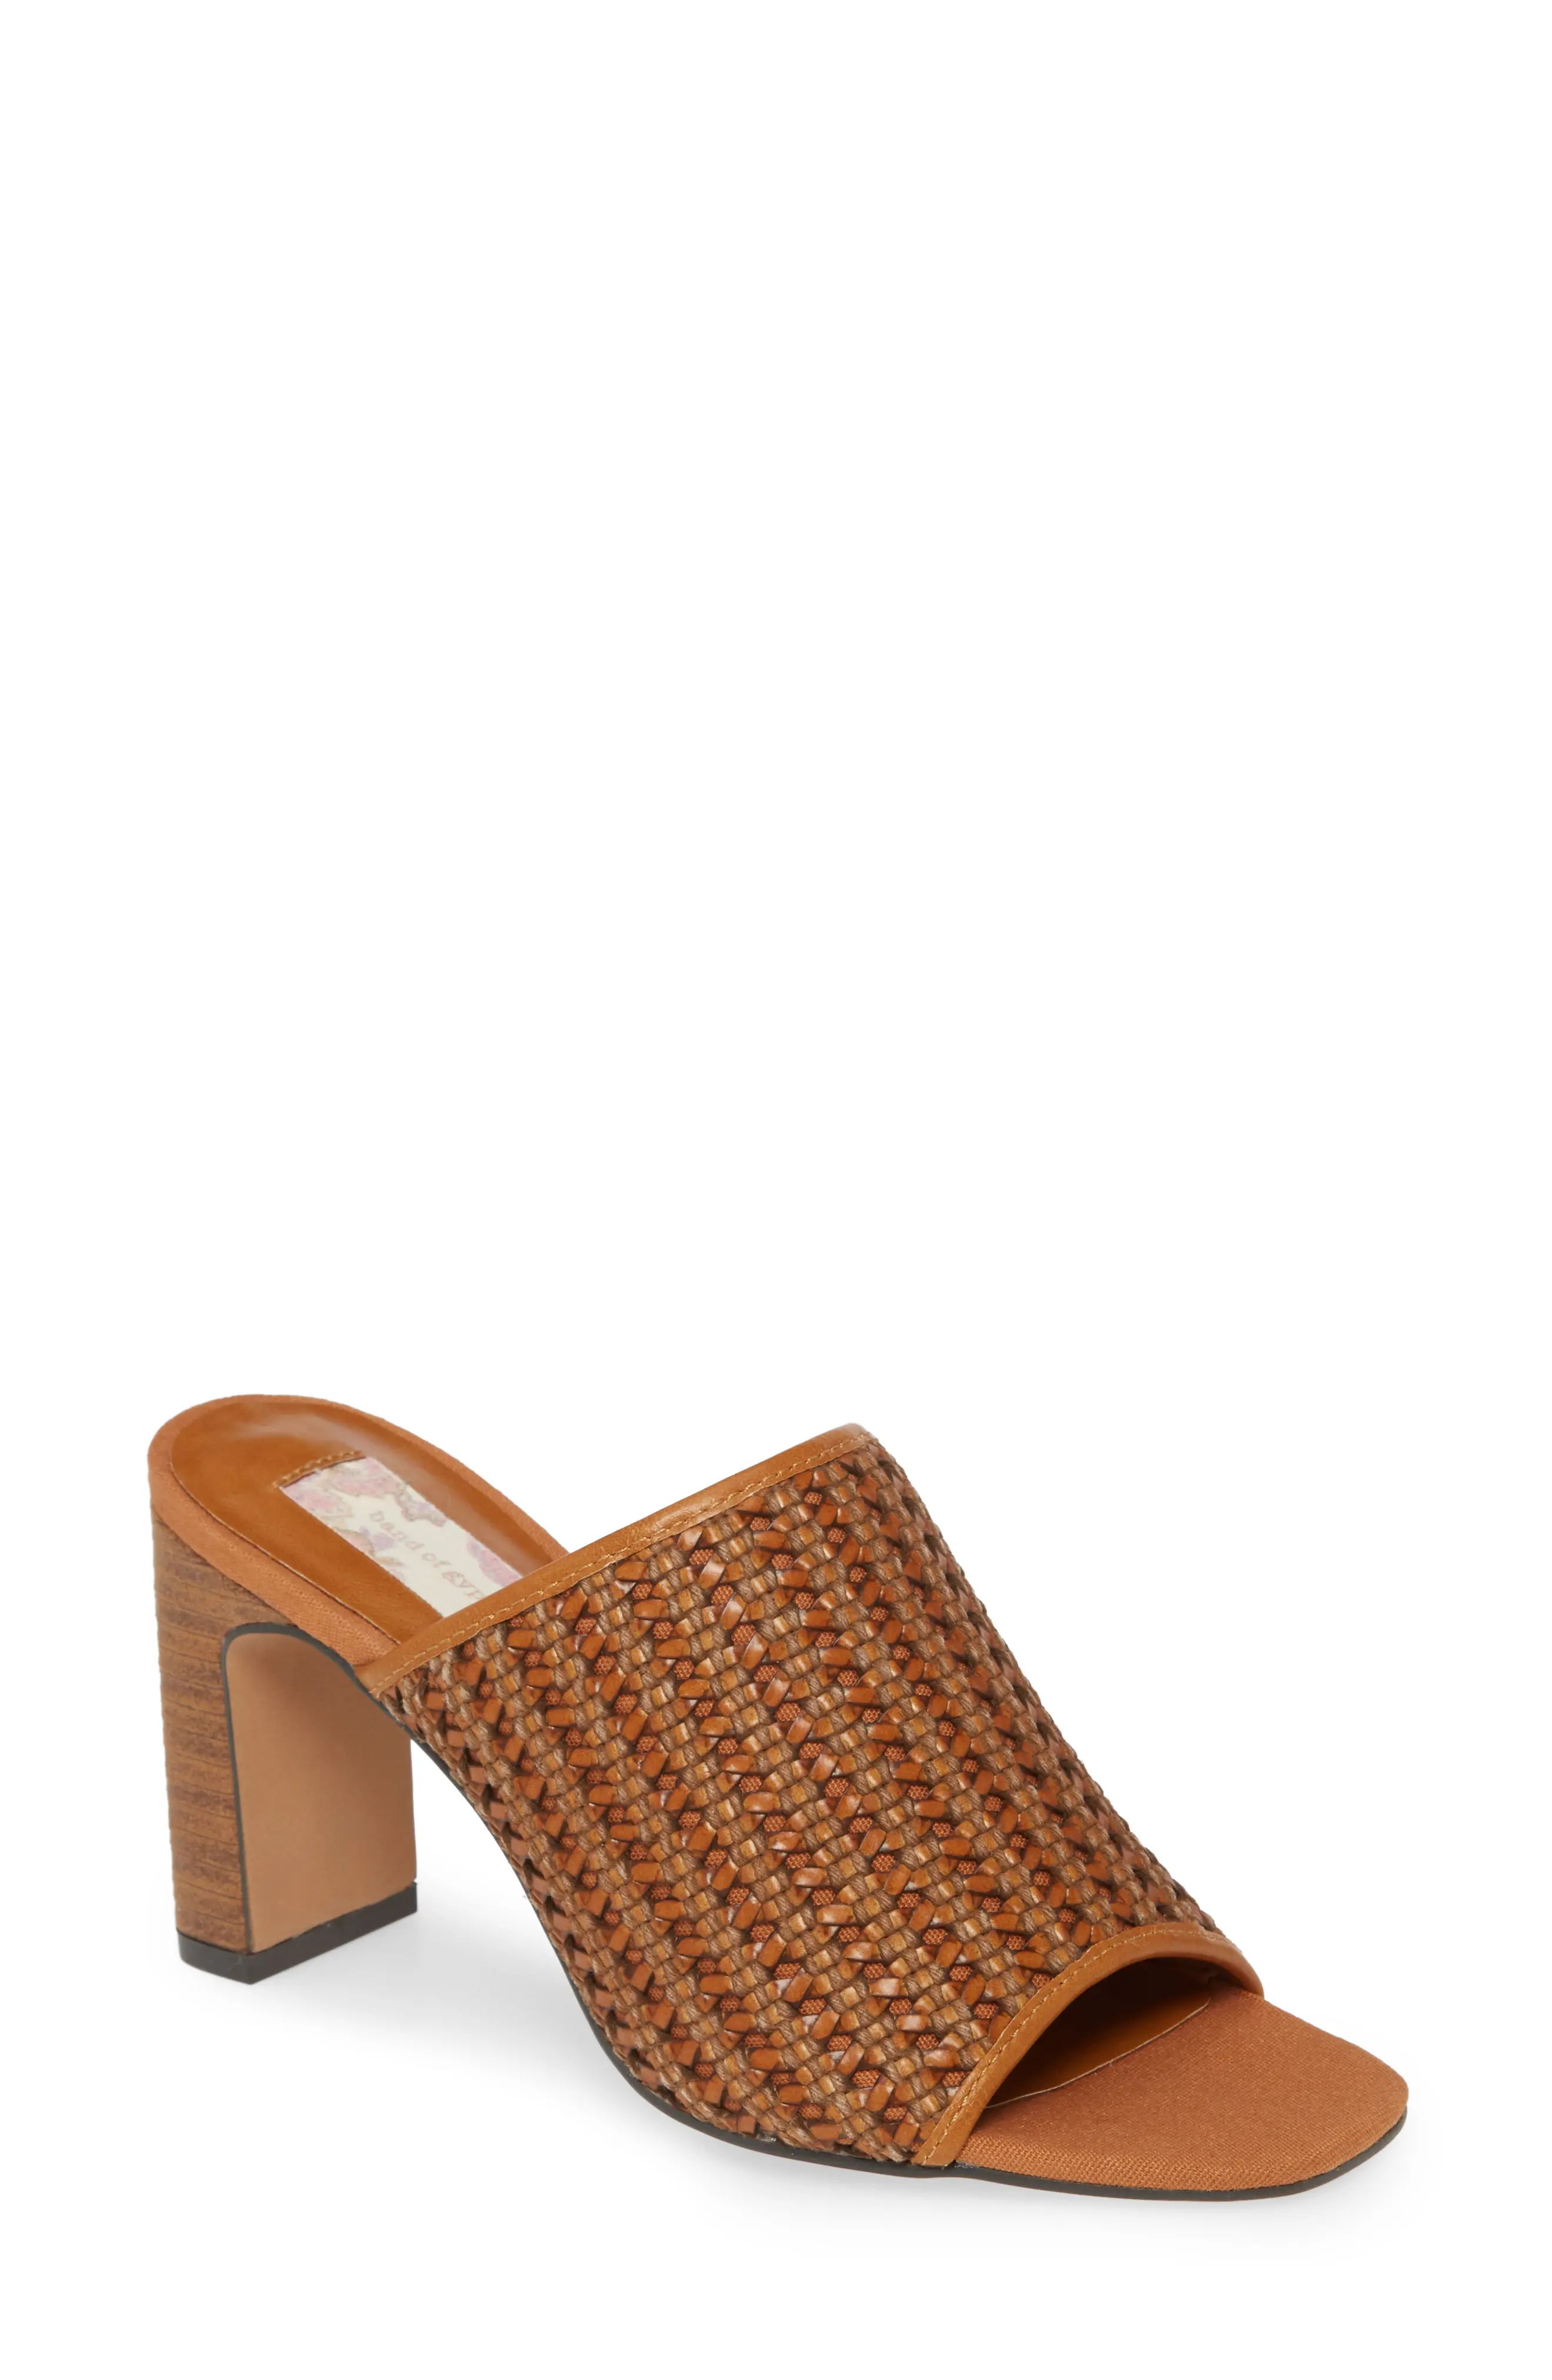 Women's Band Of Gypsies Hermosa Woven Slide Sandal, Size 9.5 M - Brown | Nordstrom